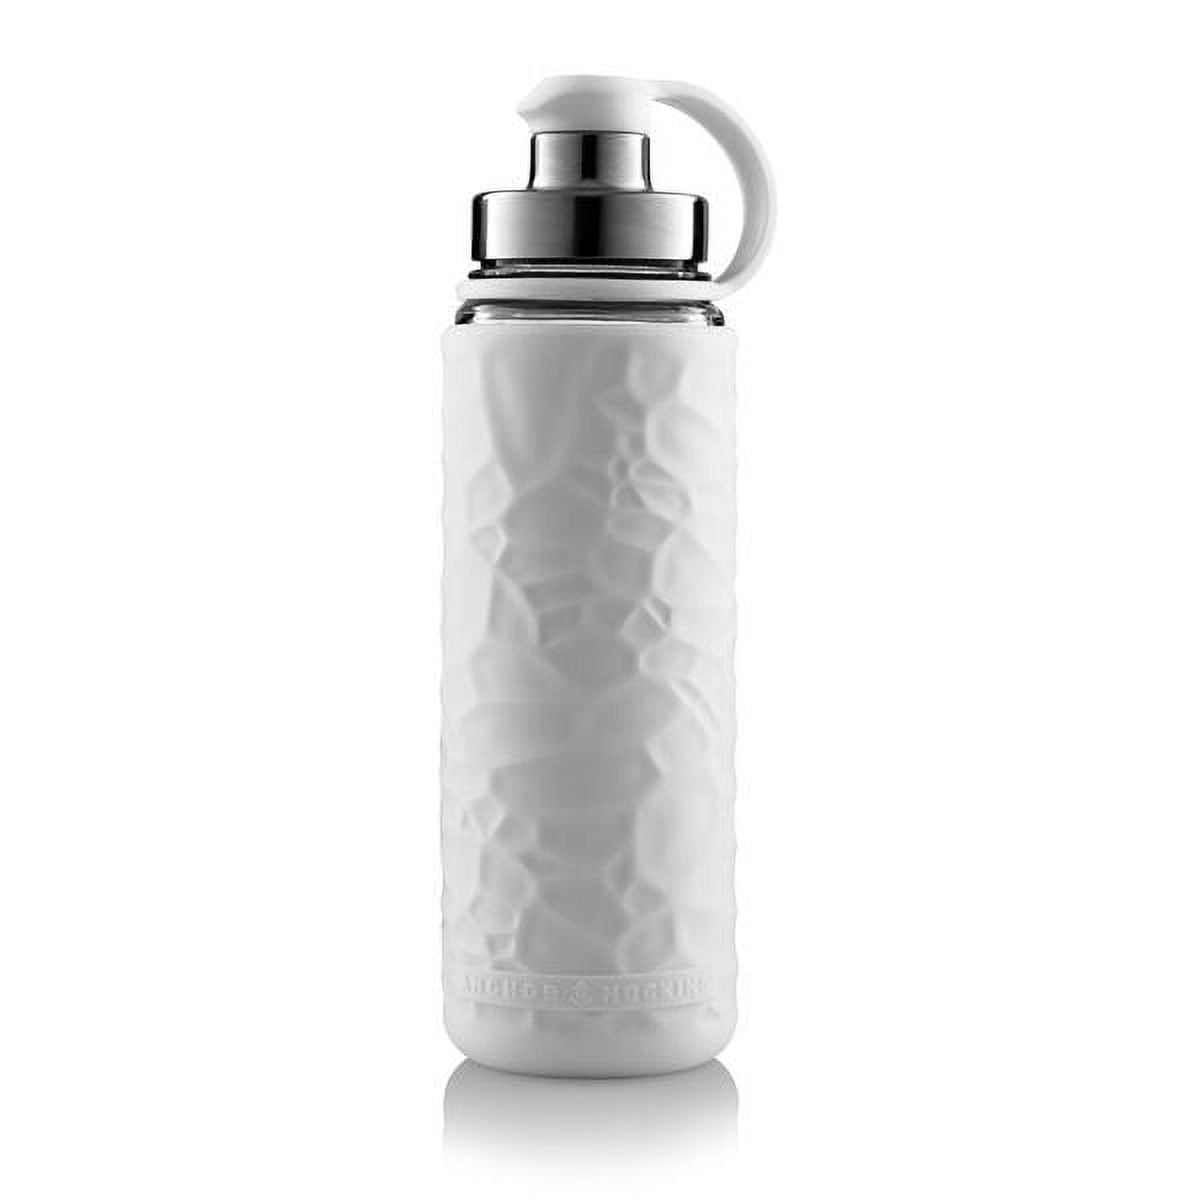 Order your robust glass drinking bottle